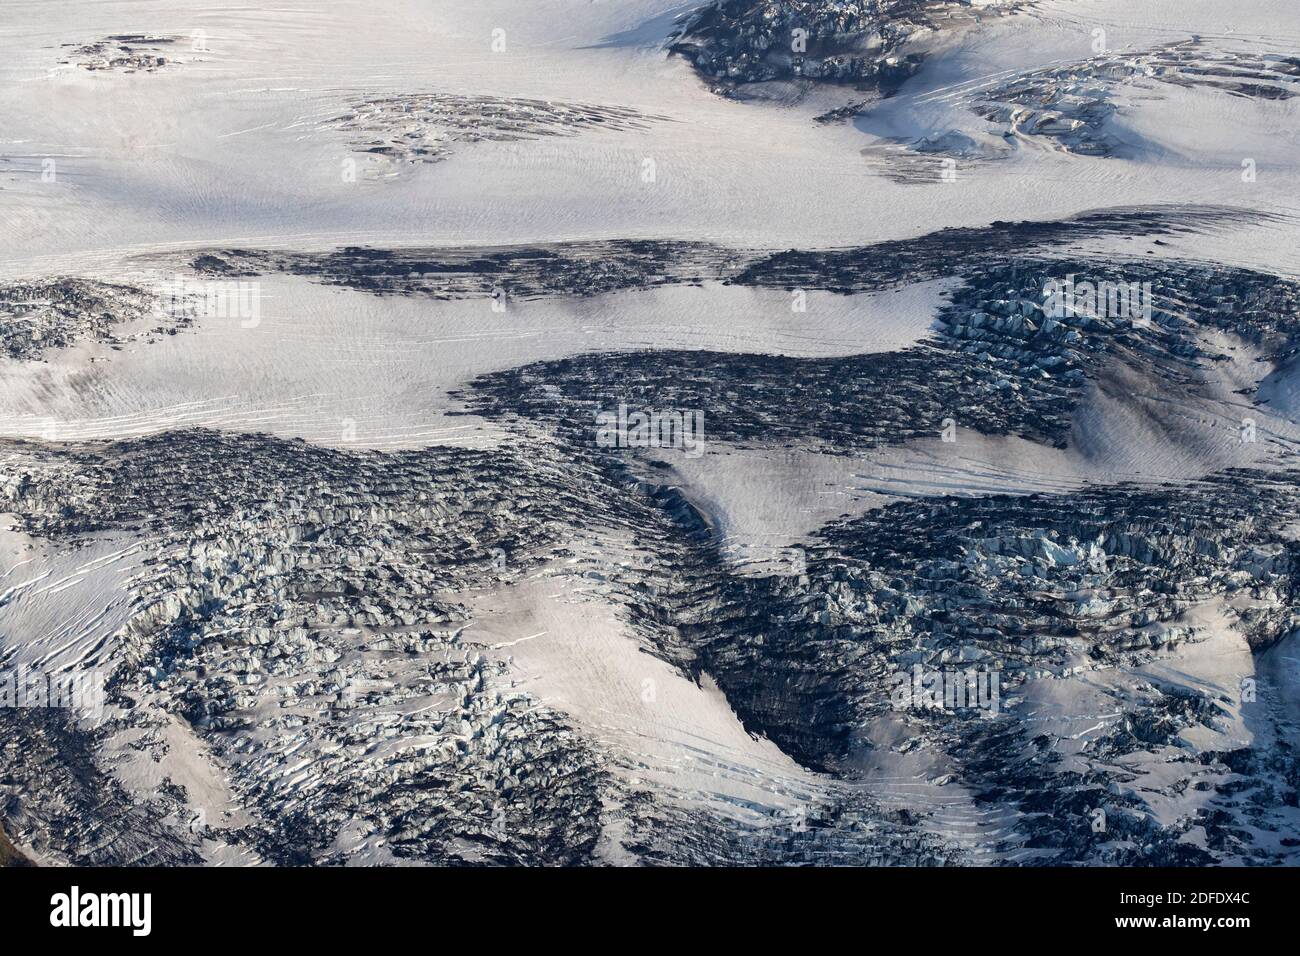 Aerial view over glacier of the volcano Eyjafjallajoekull / Eyjafjallajökull, one of the smaller ice caps of Iceland in summer Stock Photo